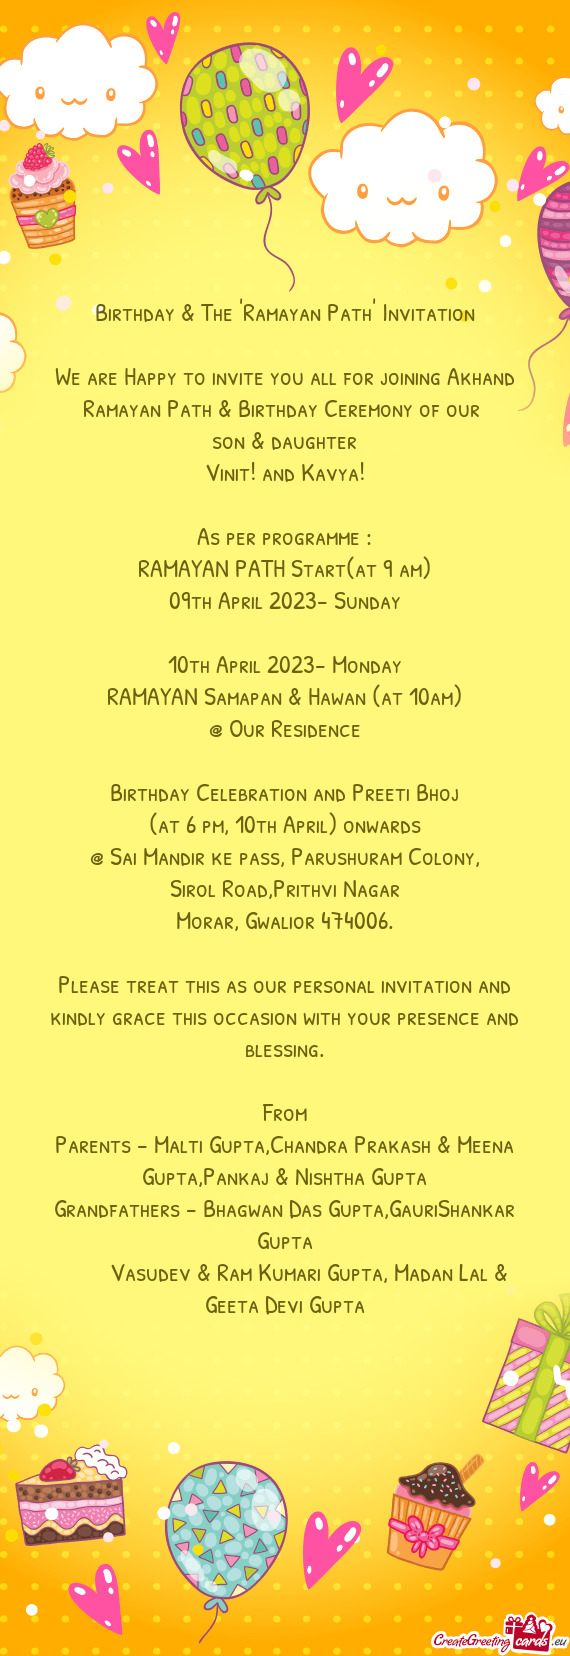 We are Happy to invite you all for joining Akhand Ramayan Path & Birthday Ceremony of our